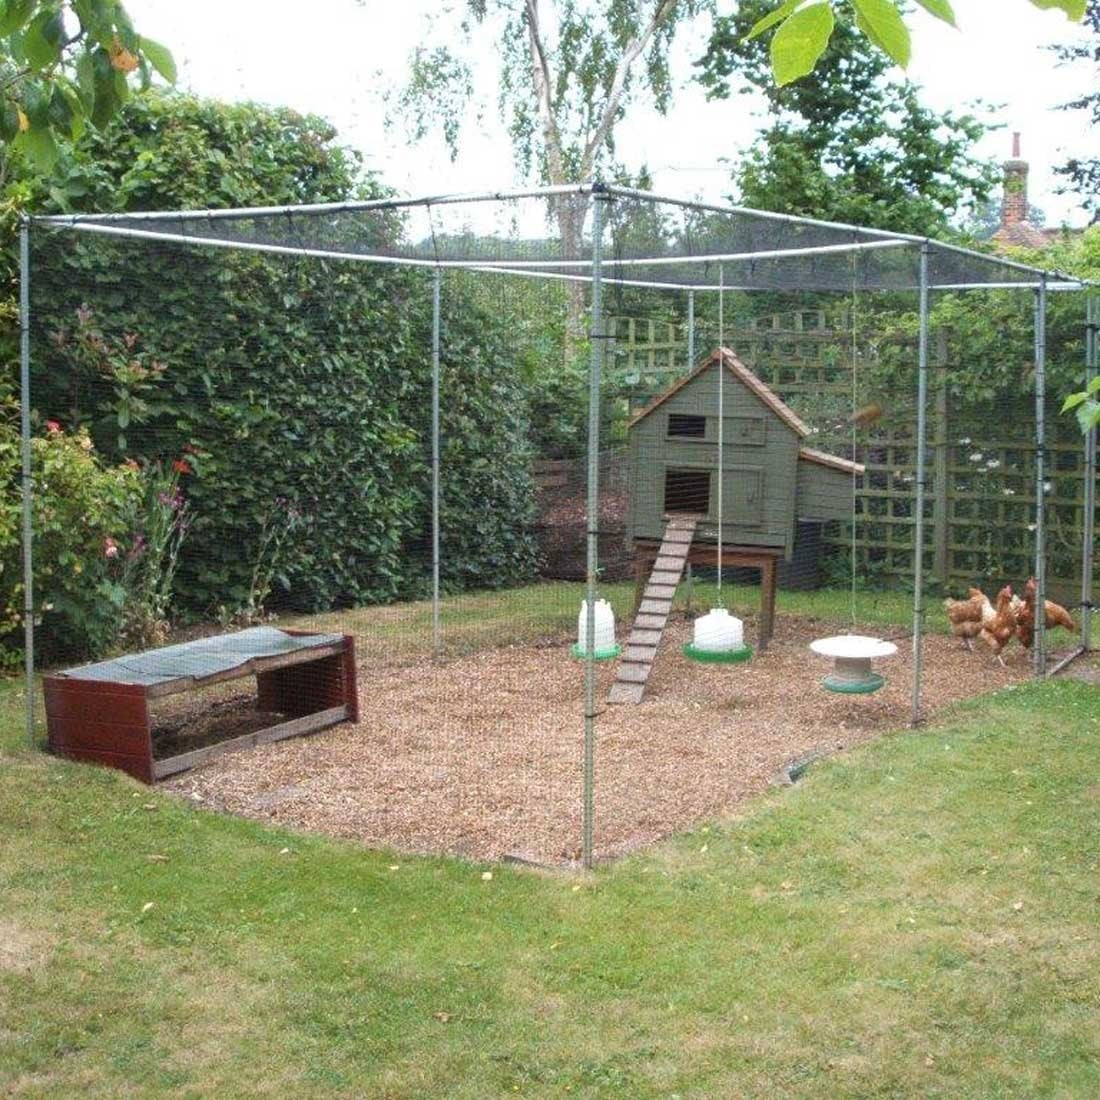 Poultry Cages & Netting - Garden Supplies at Harrod Horticultural